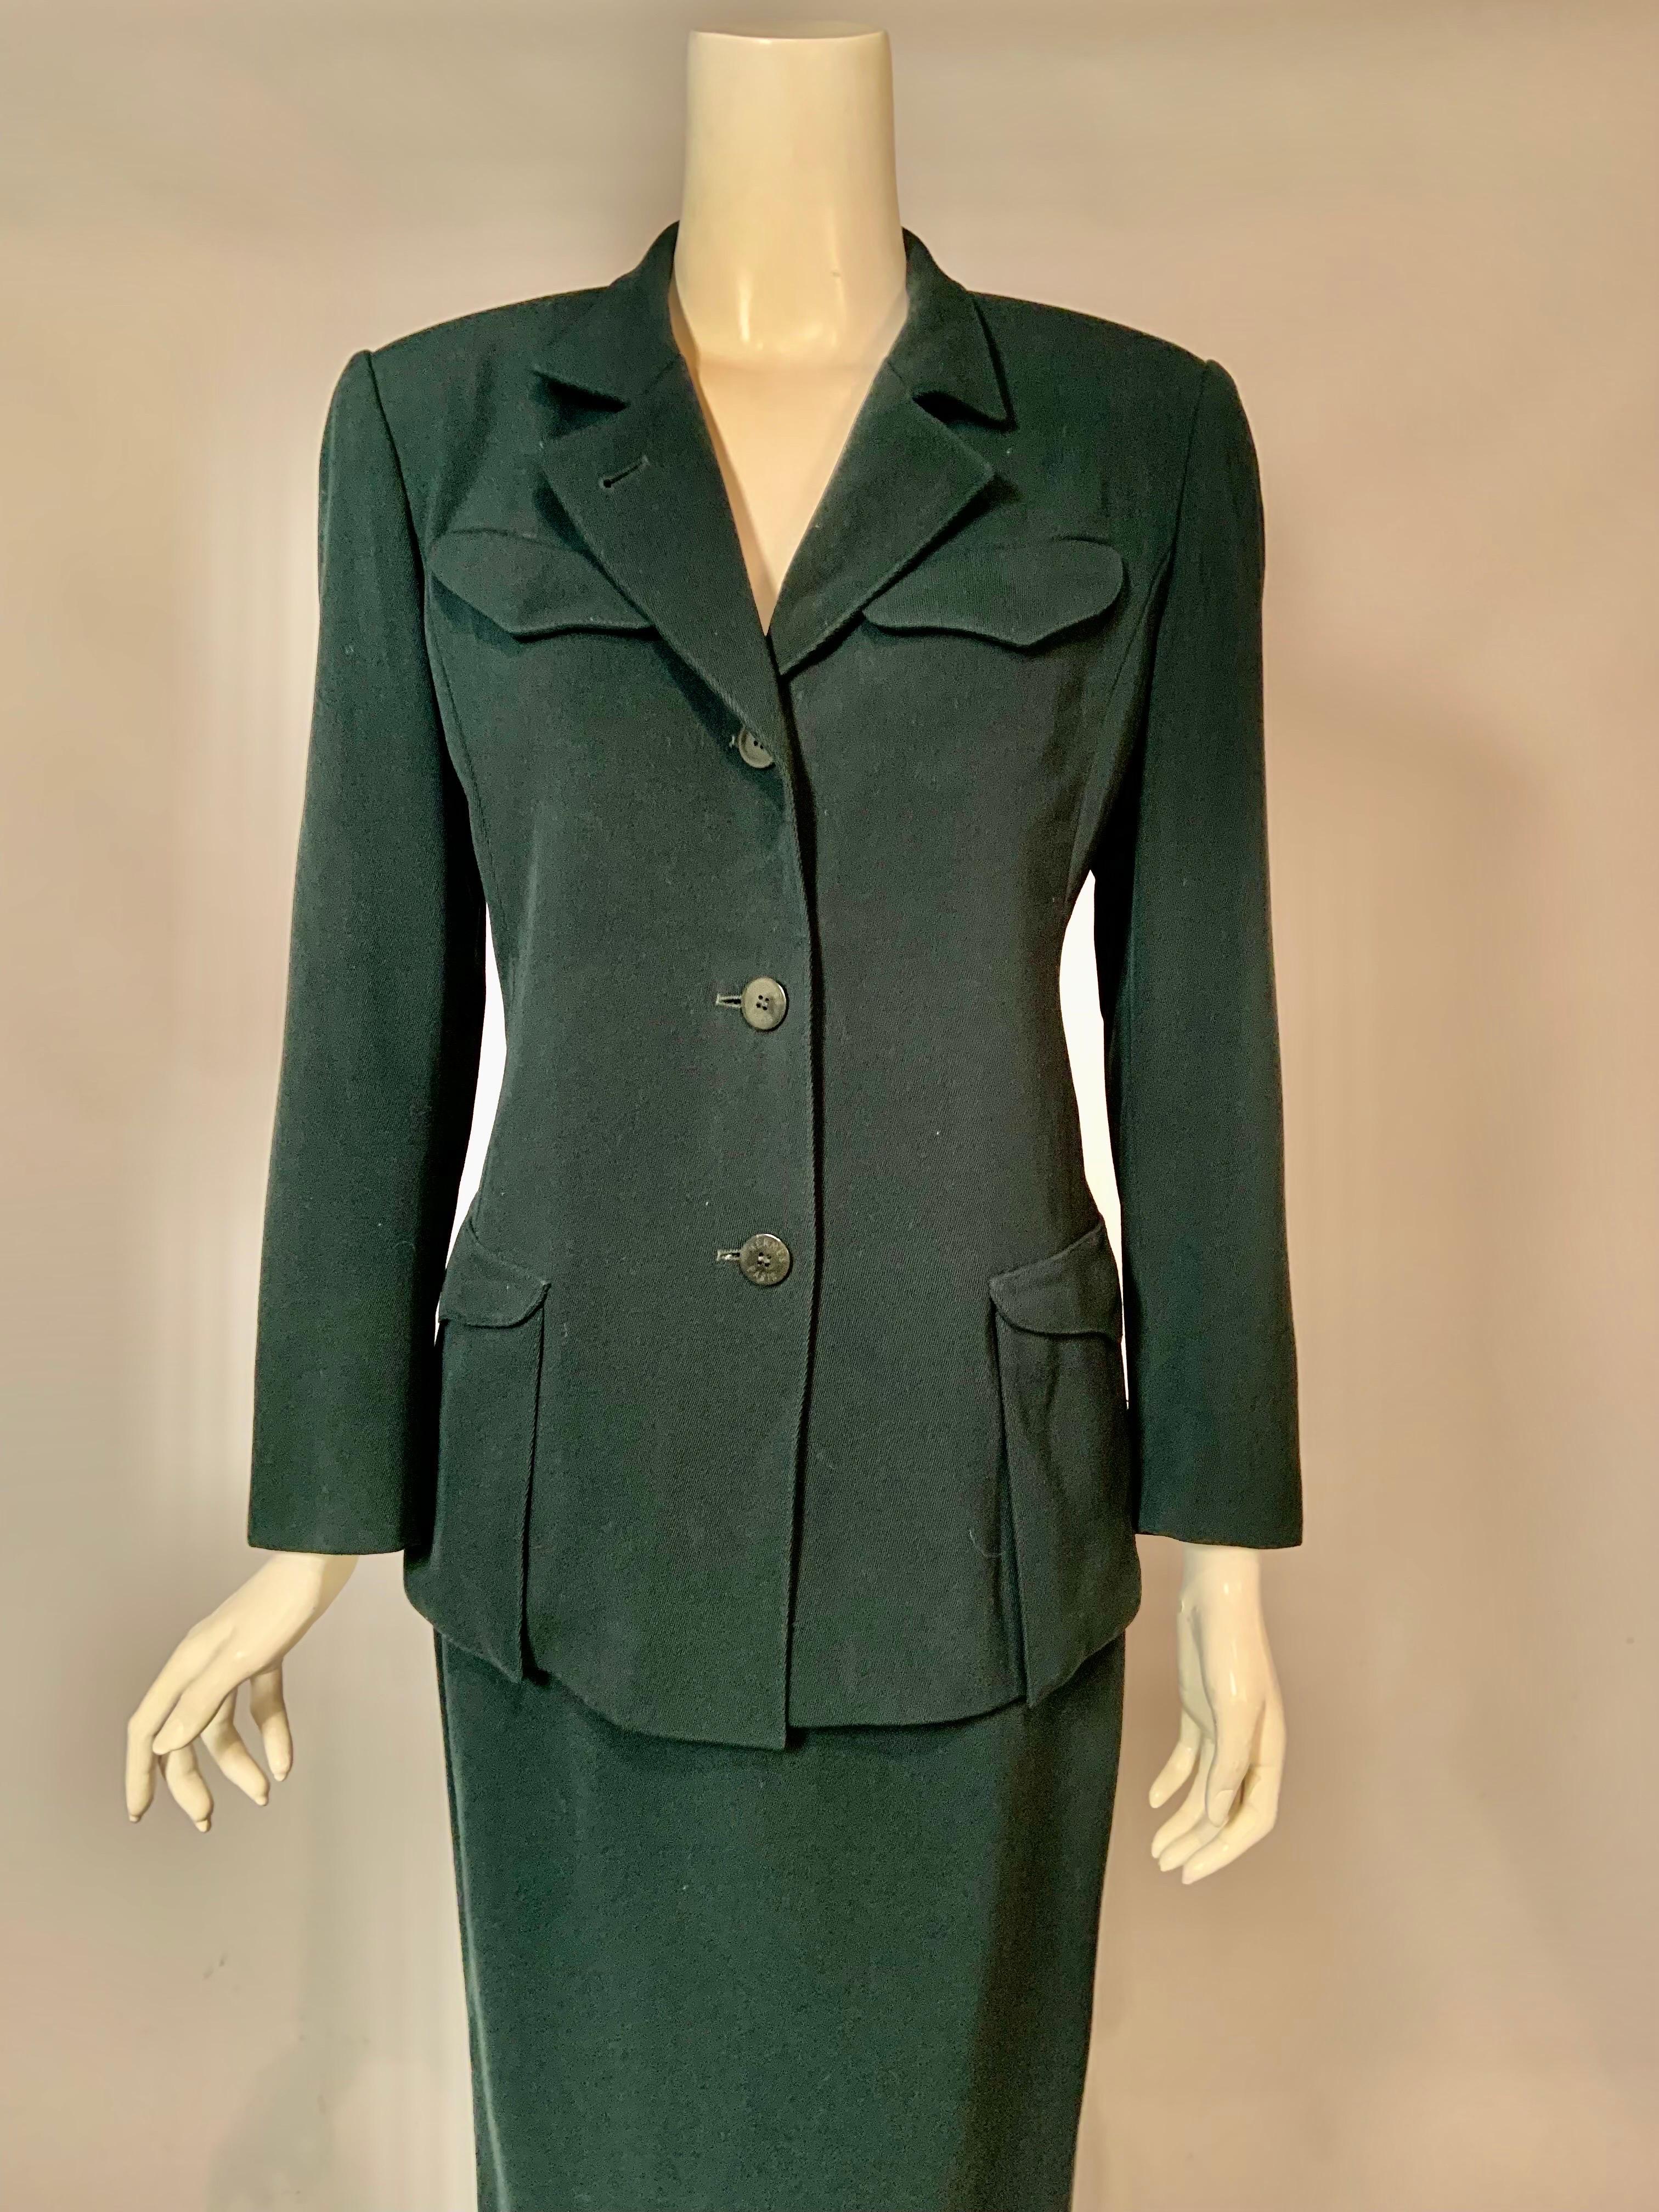 This is a great vintage Hermes bottle green wool suit jacket and midi skirt suit from the 1980's, and a wonderful example of the 80's does 40's.  The jacket has notched lapels and two breast and two hip pockets.  There are three Hermes logo buttons